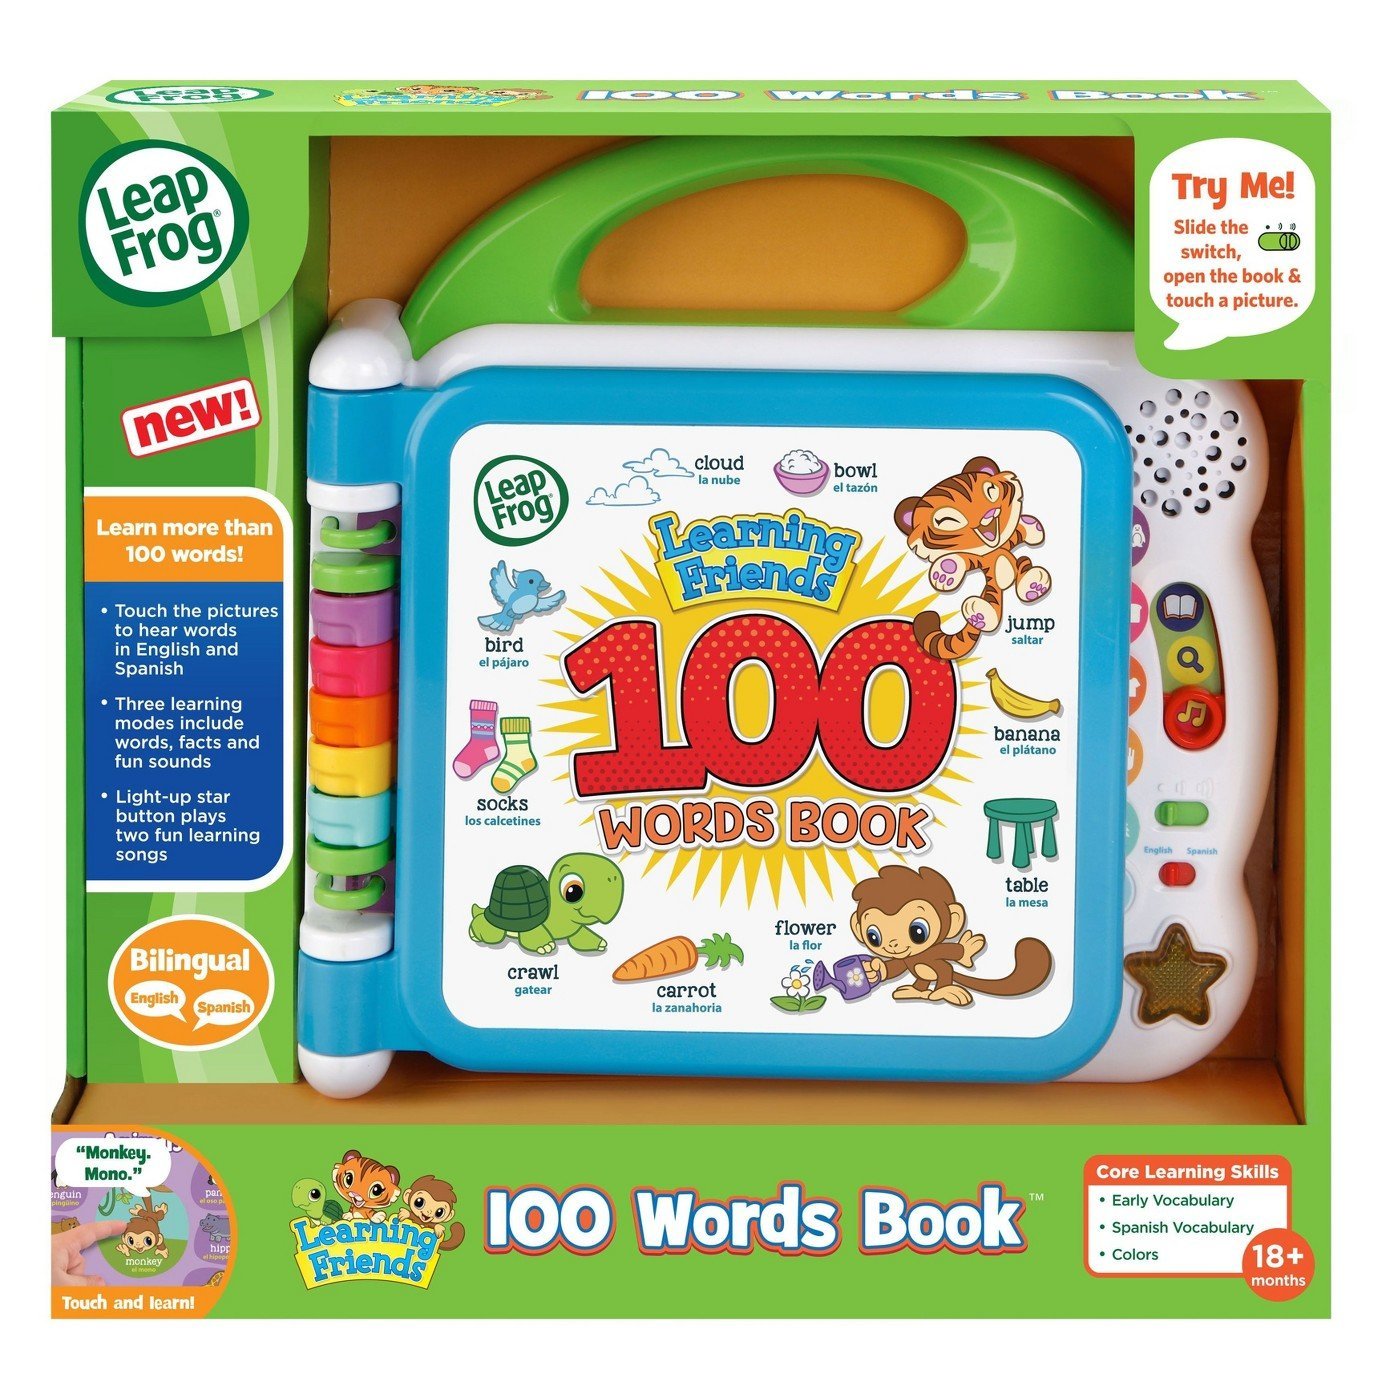 interactive toys for two year olds